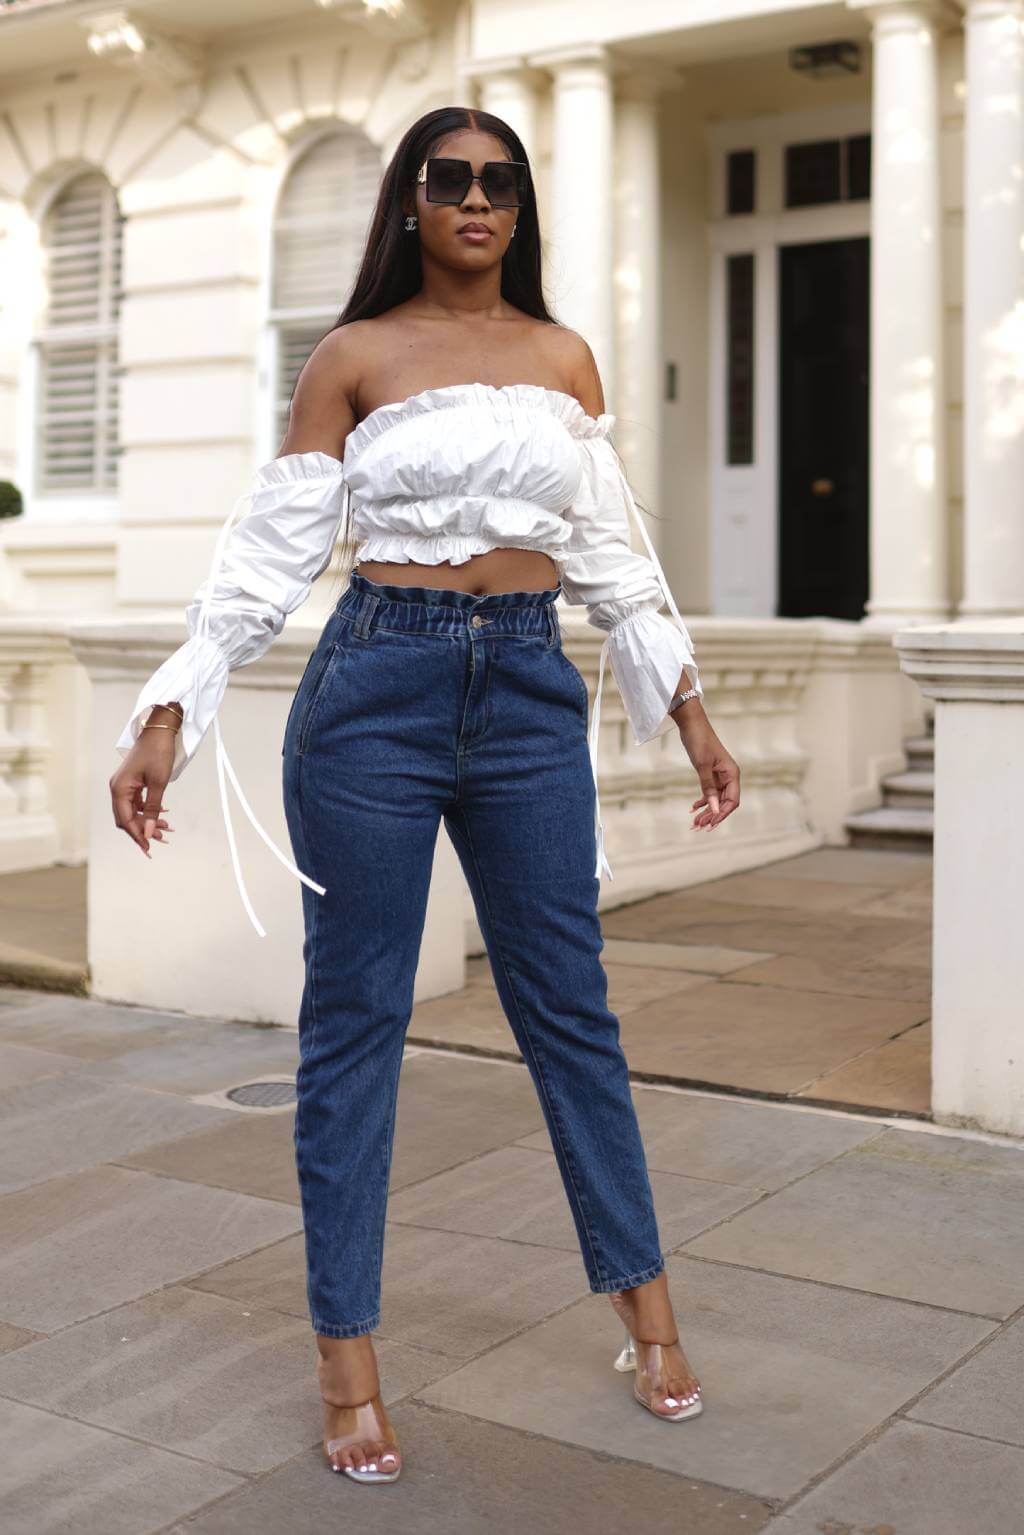 Featuring trendy High Waist Shape Paperbag Jeans. Our top quality denim gives you shape and the gathered elastic waist snatches your waist together. It's more durable to use and better to wash. Plus sizes are available for this style. Give your style a boost with our timeless jeans.